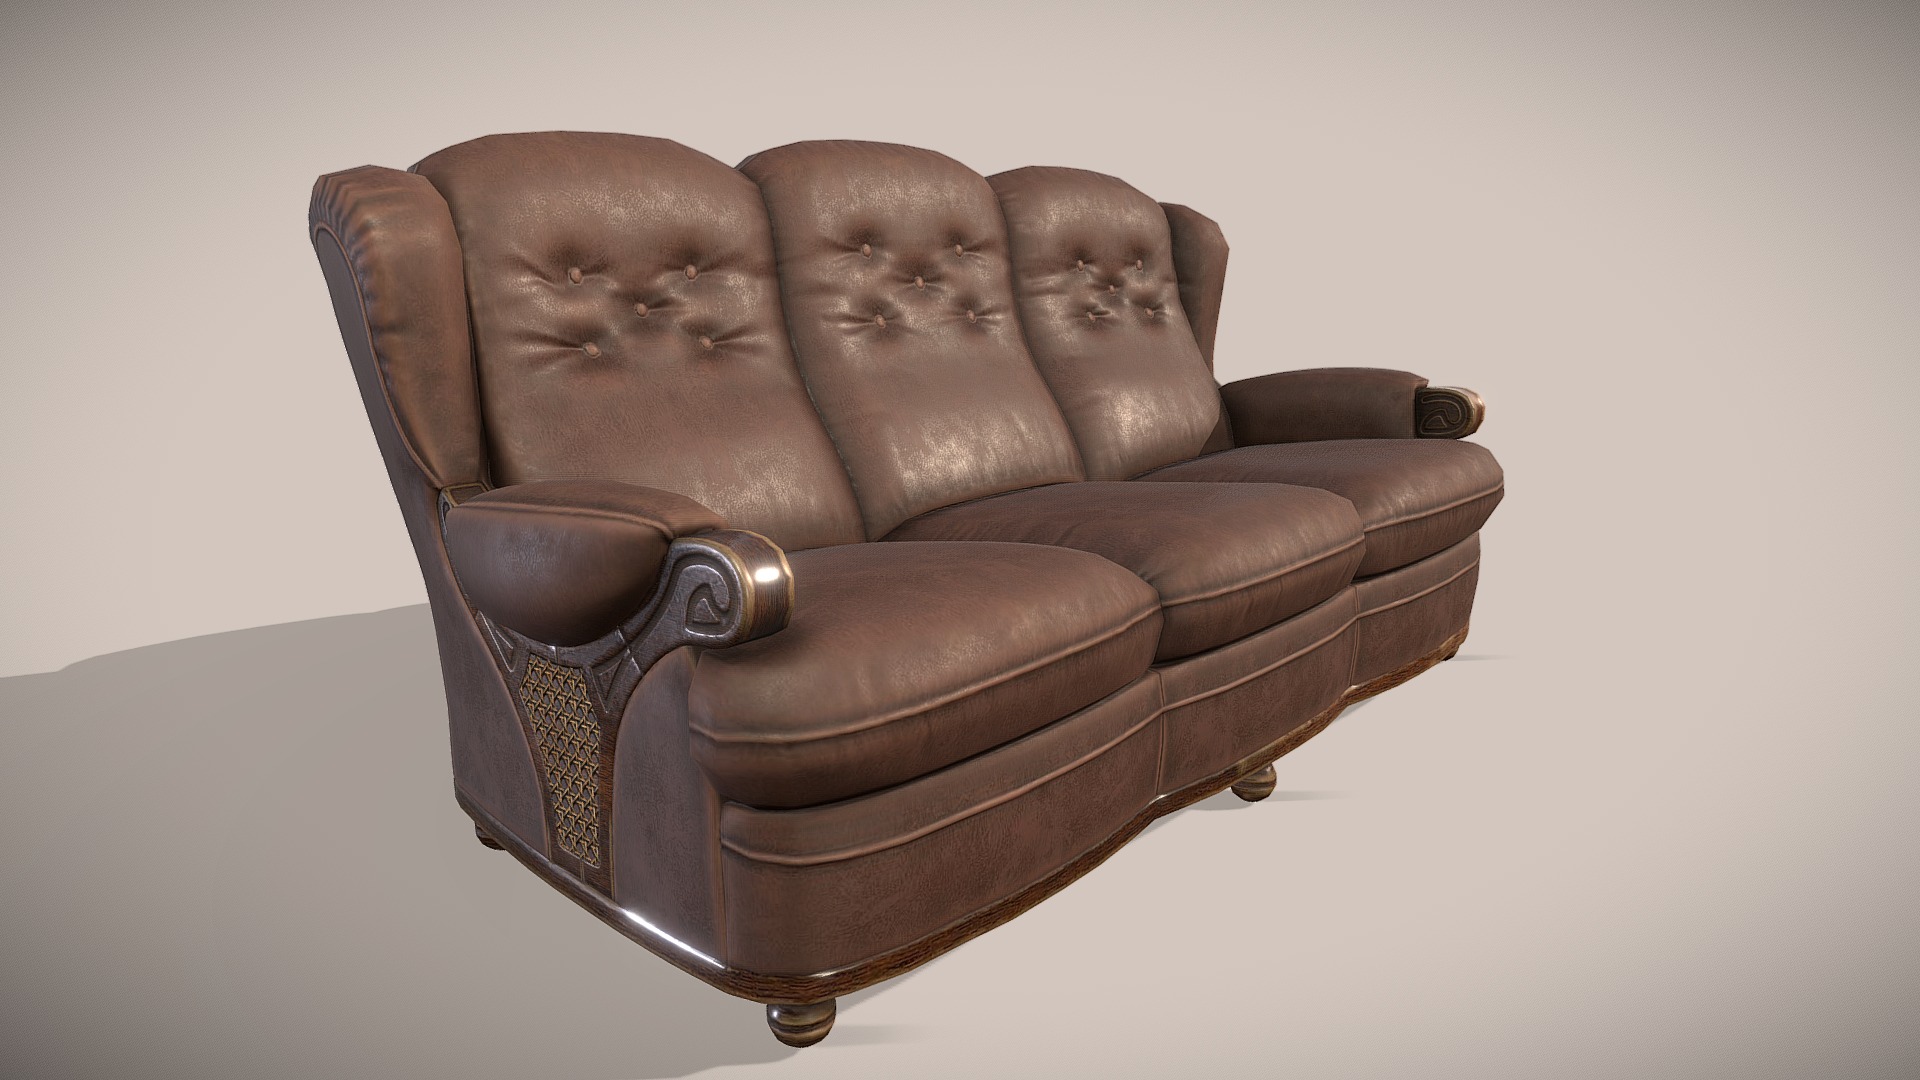 3D model Sofa classic Low-poly PBR - This is a 3D model of the Sofa classic Low-poly PBR. The 3D model is about a brown leather chair.